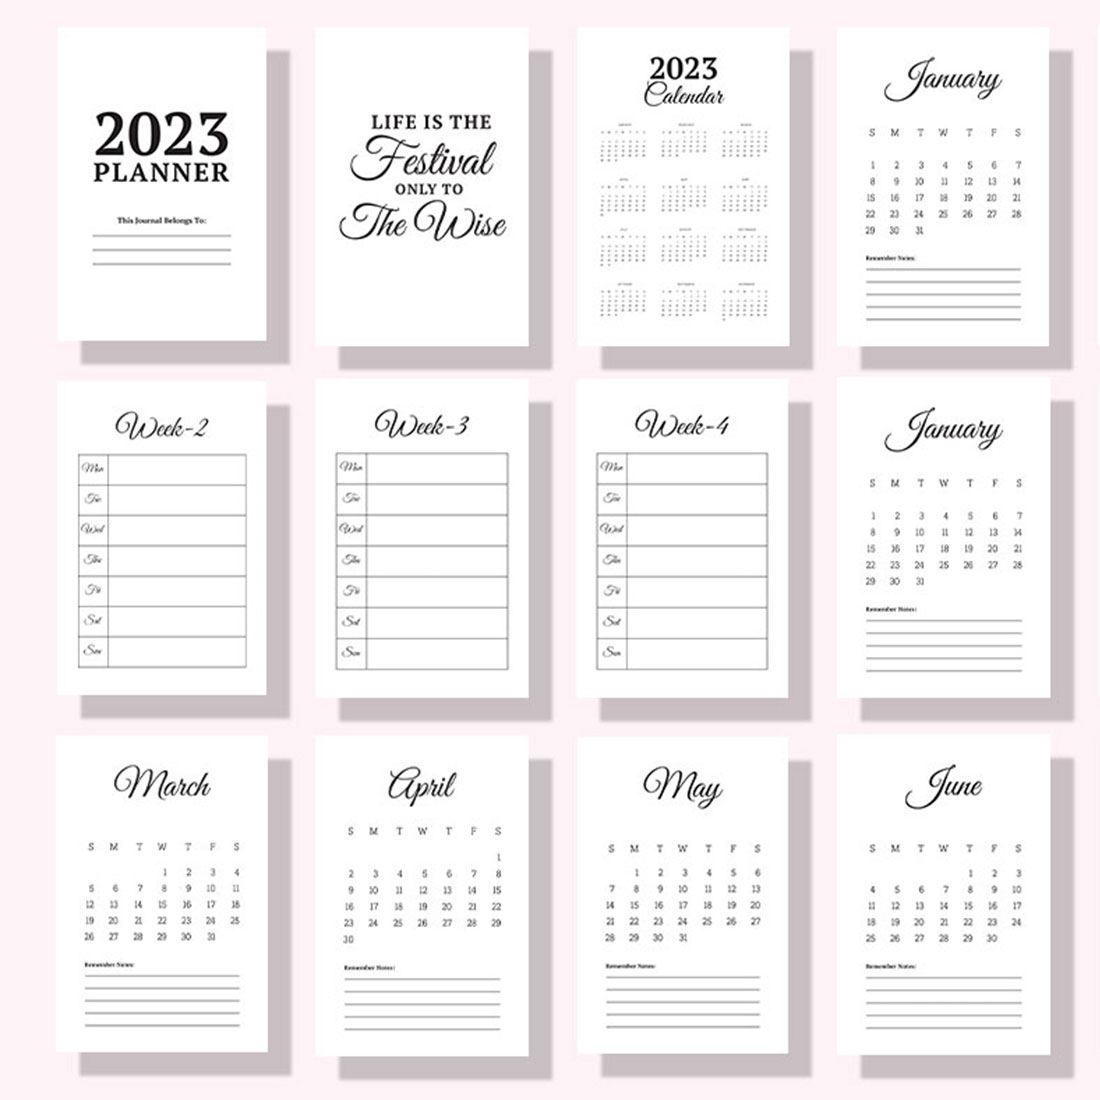 Preview of planner pages.